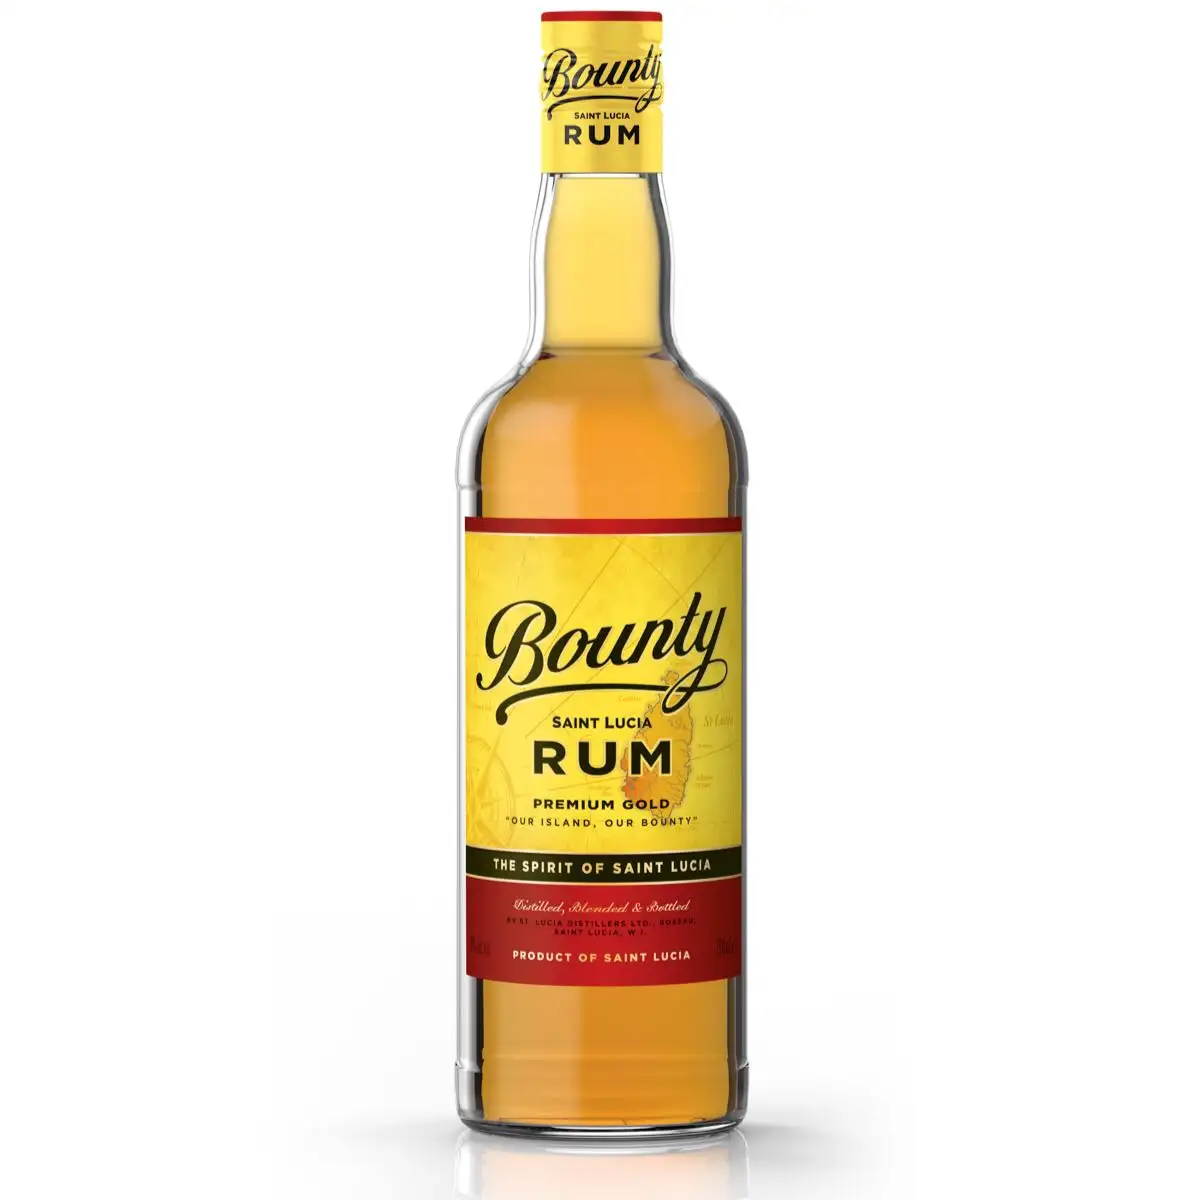 Image of the front of the bottle of the rum Bounty Premium Gold